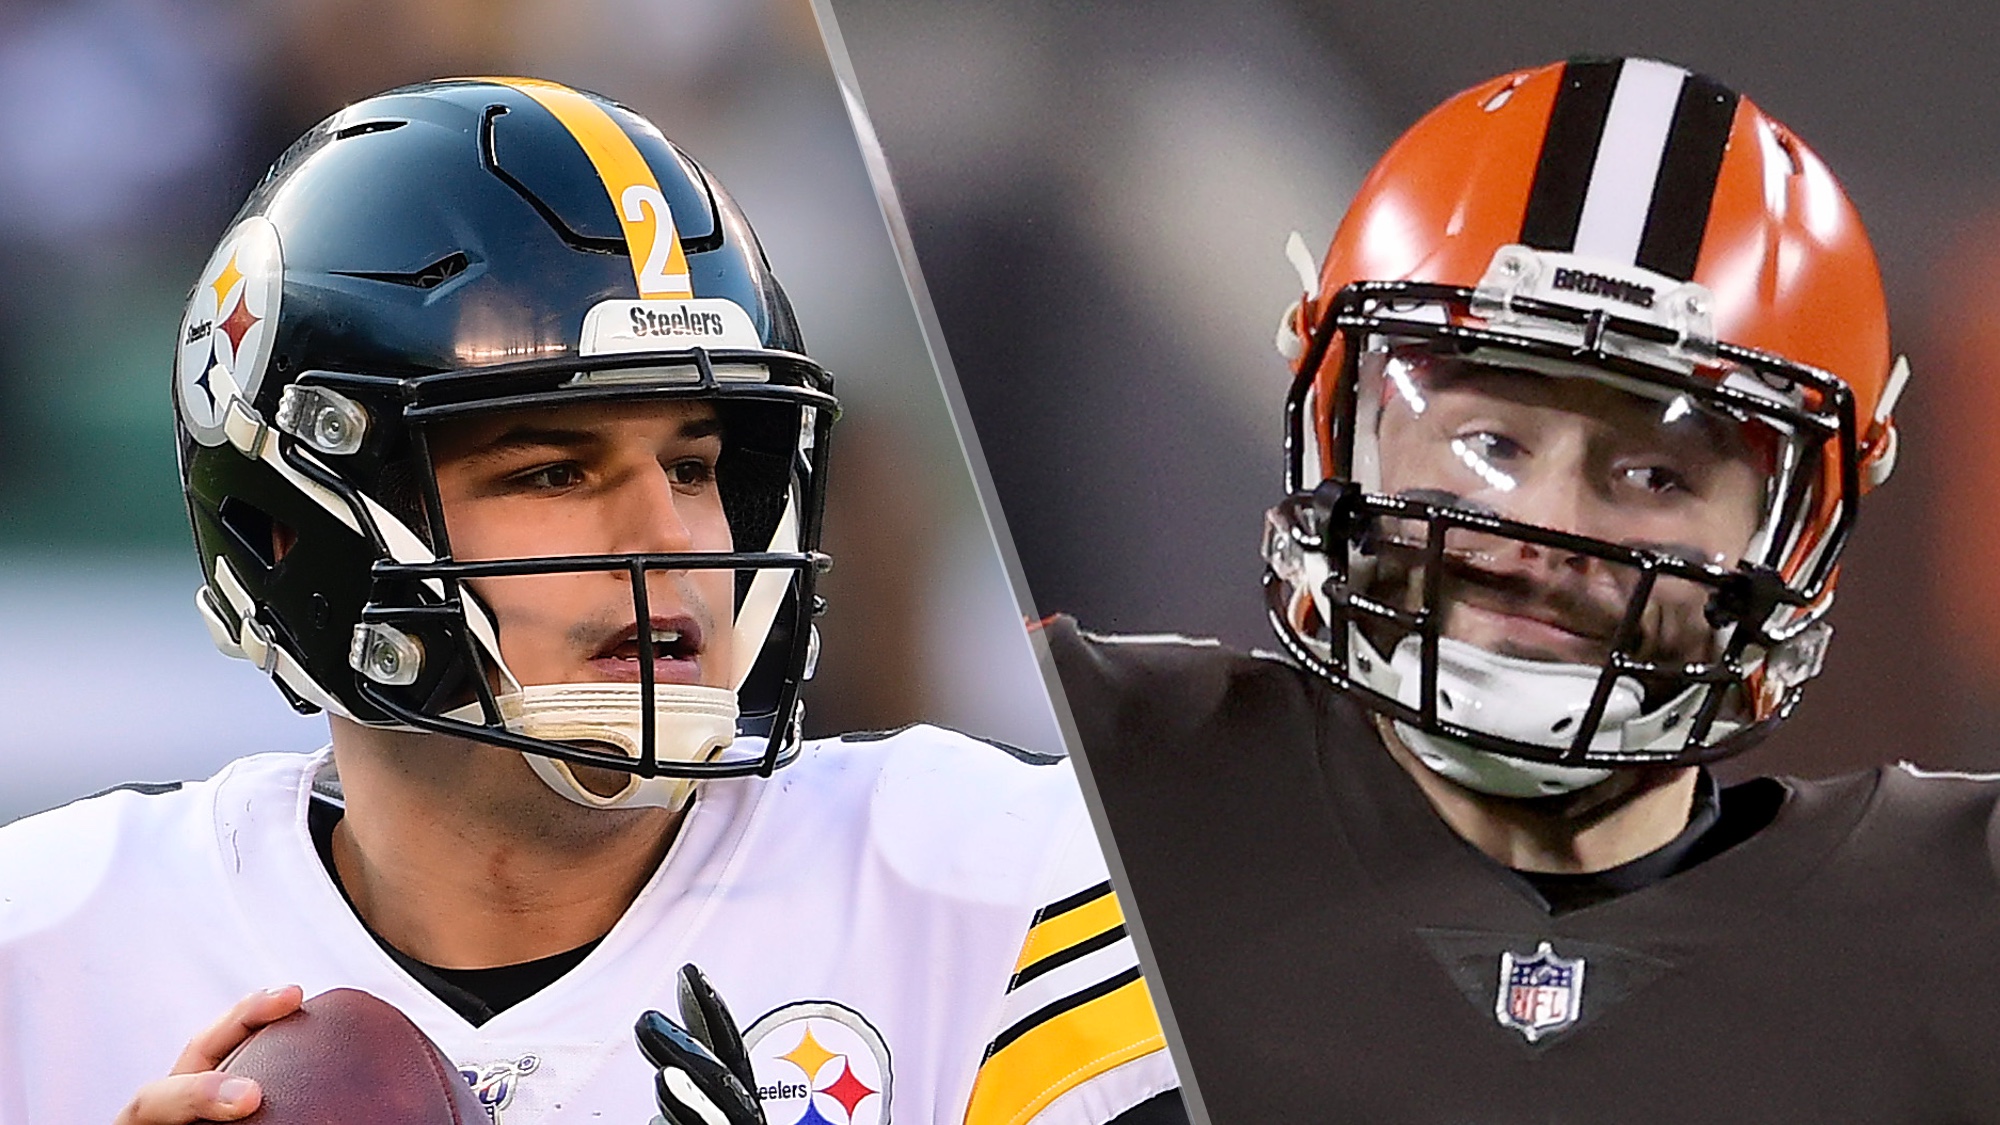 Steelers vs Browns live stream: How to watch NFL week 17 game